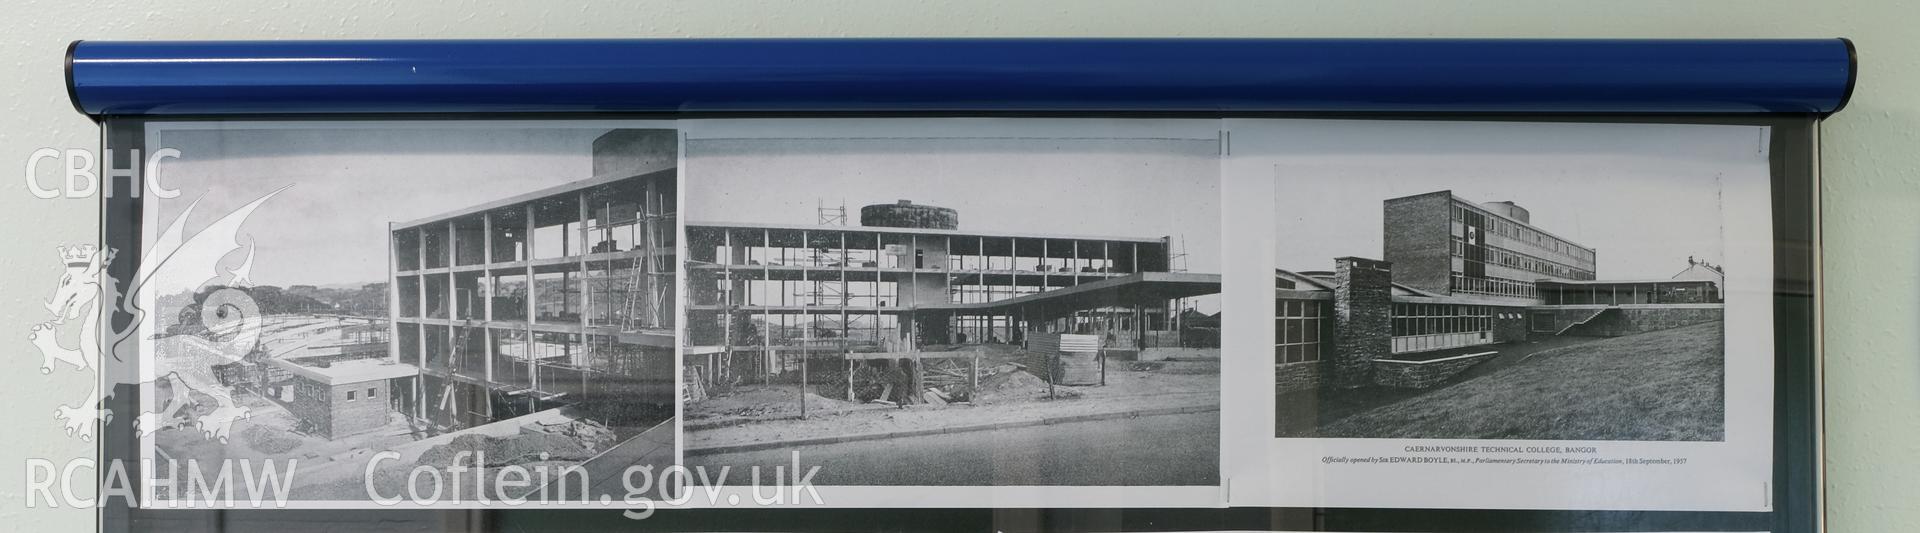 Digital colour photograph showing detailed view of black and white photographs of Caernarfonshire Technical College under construction. Photographed by Dilys Morgan and donated by Wyn Thomas of Grwp Llandrillo-Menai Further Education College, 2019.